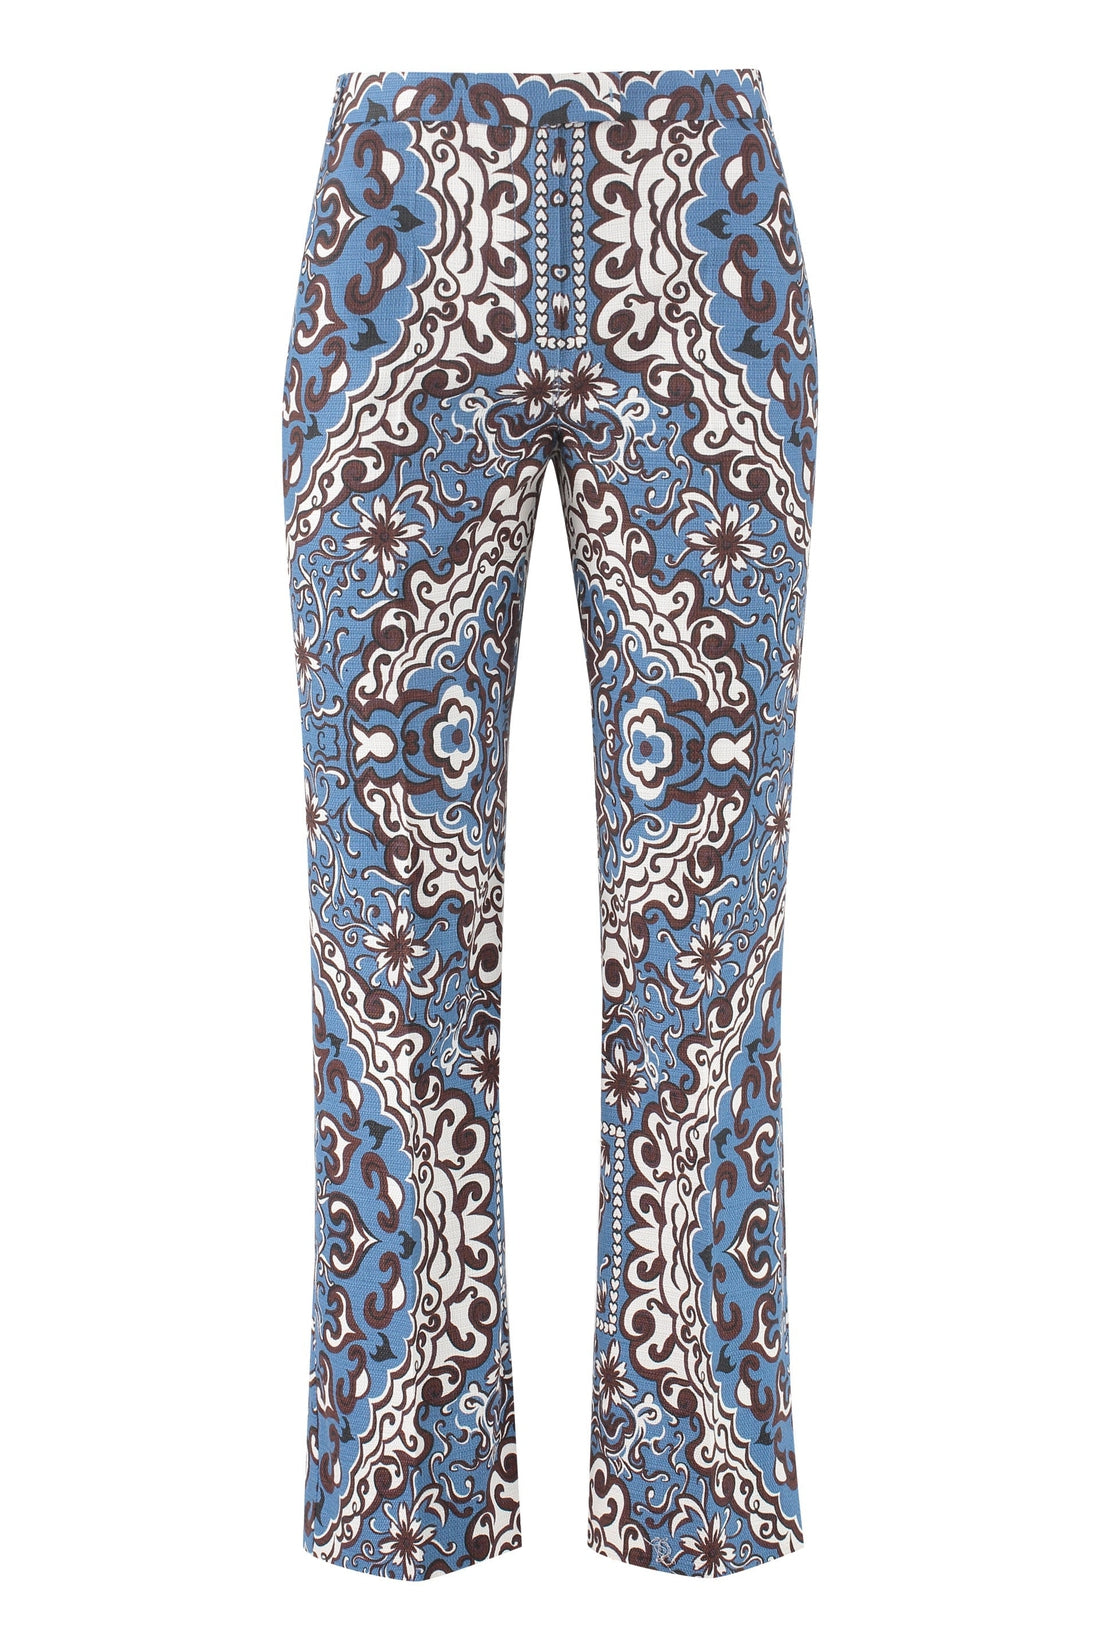 S MAX MARA-OUTLET-SALE-Printed cotton trousers-ARCHIVIST